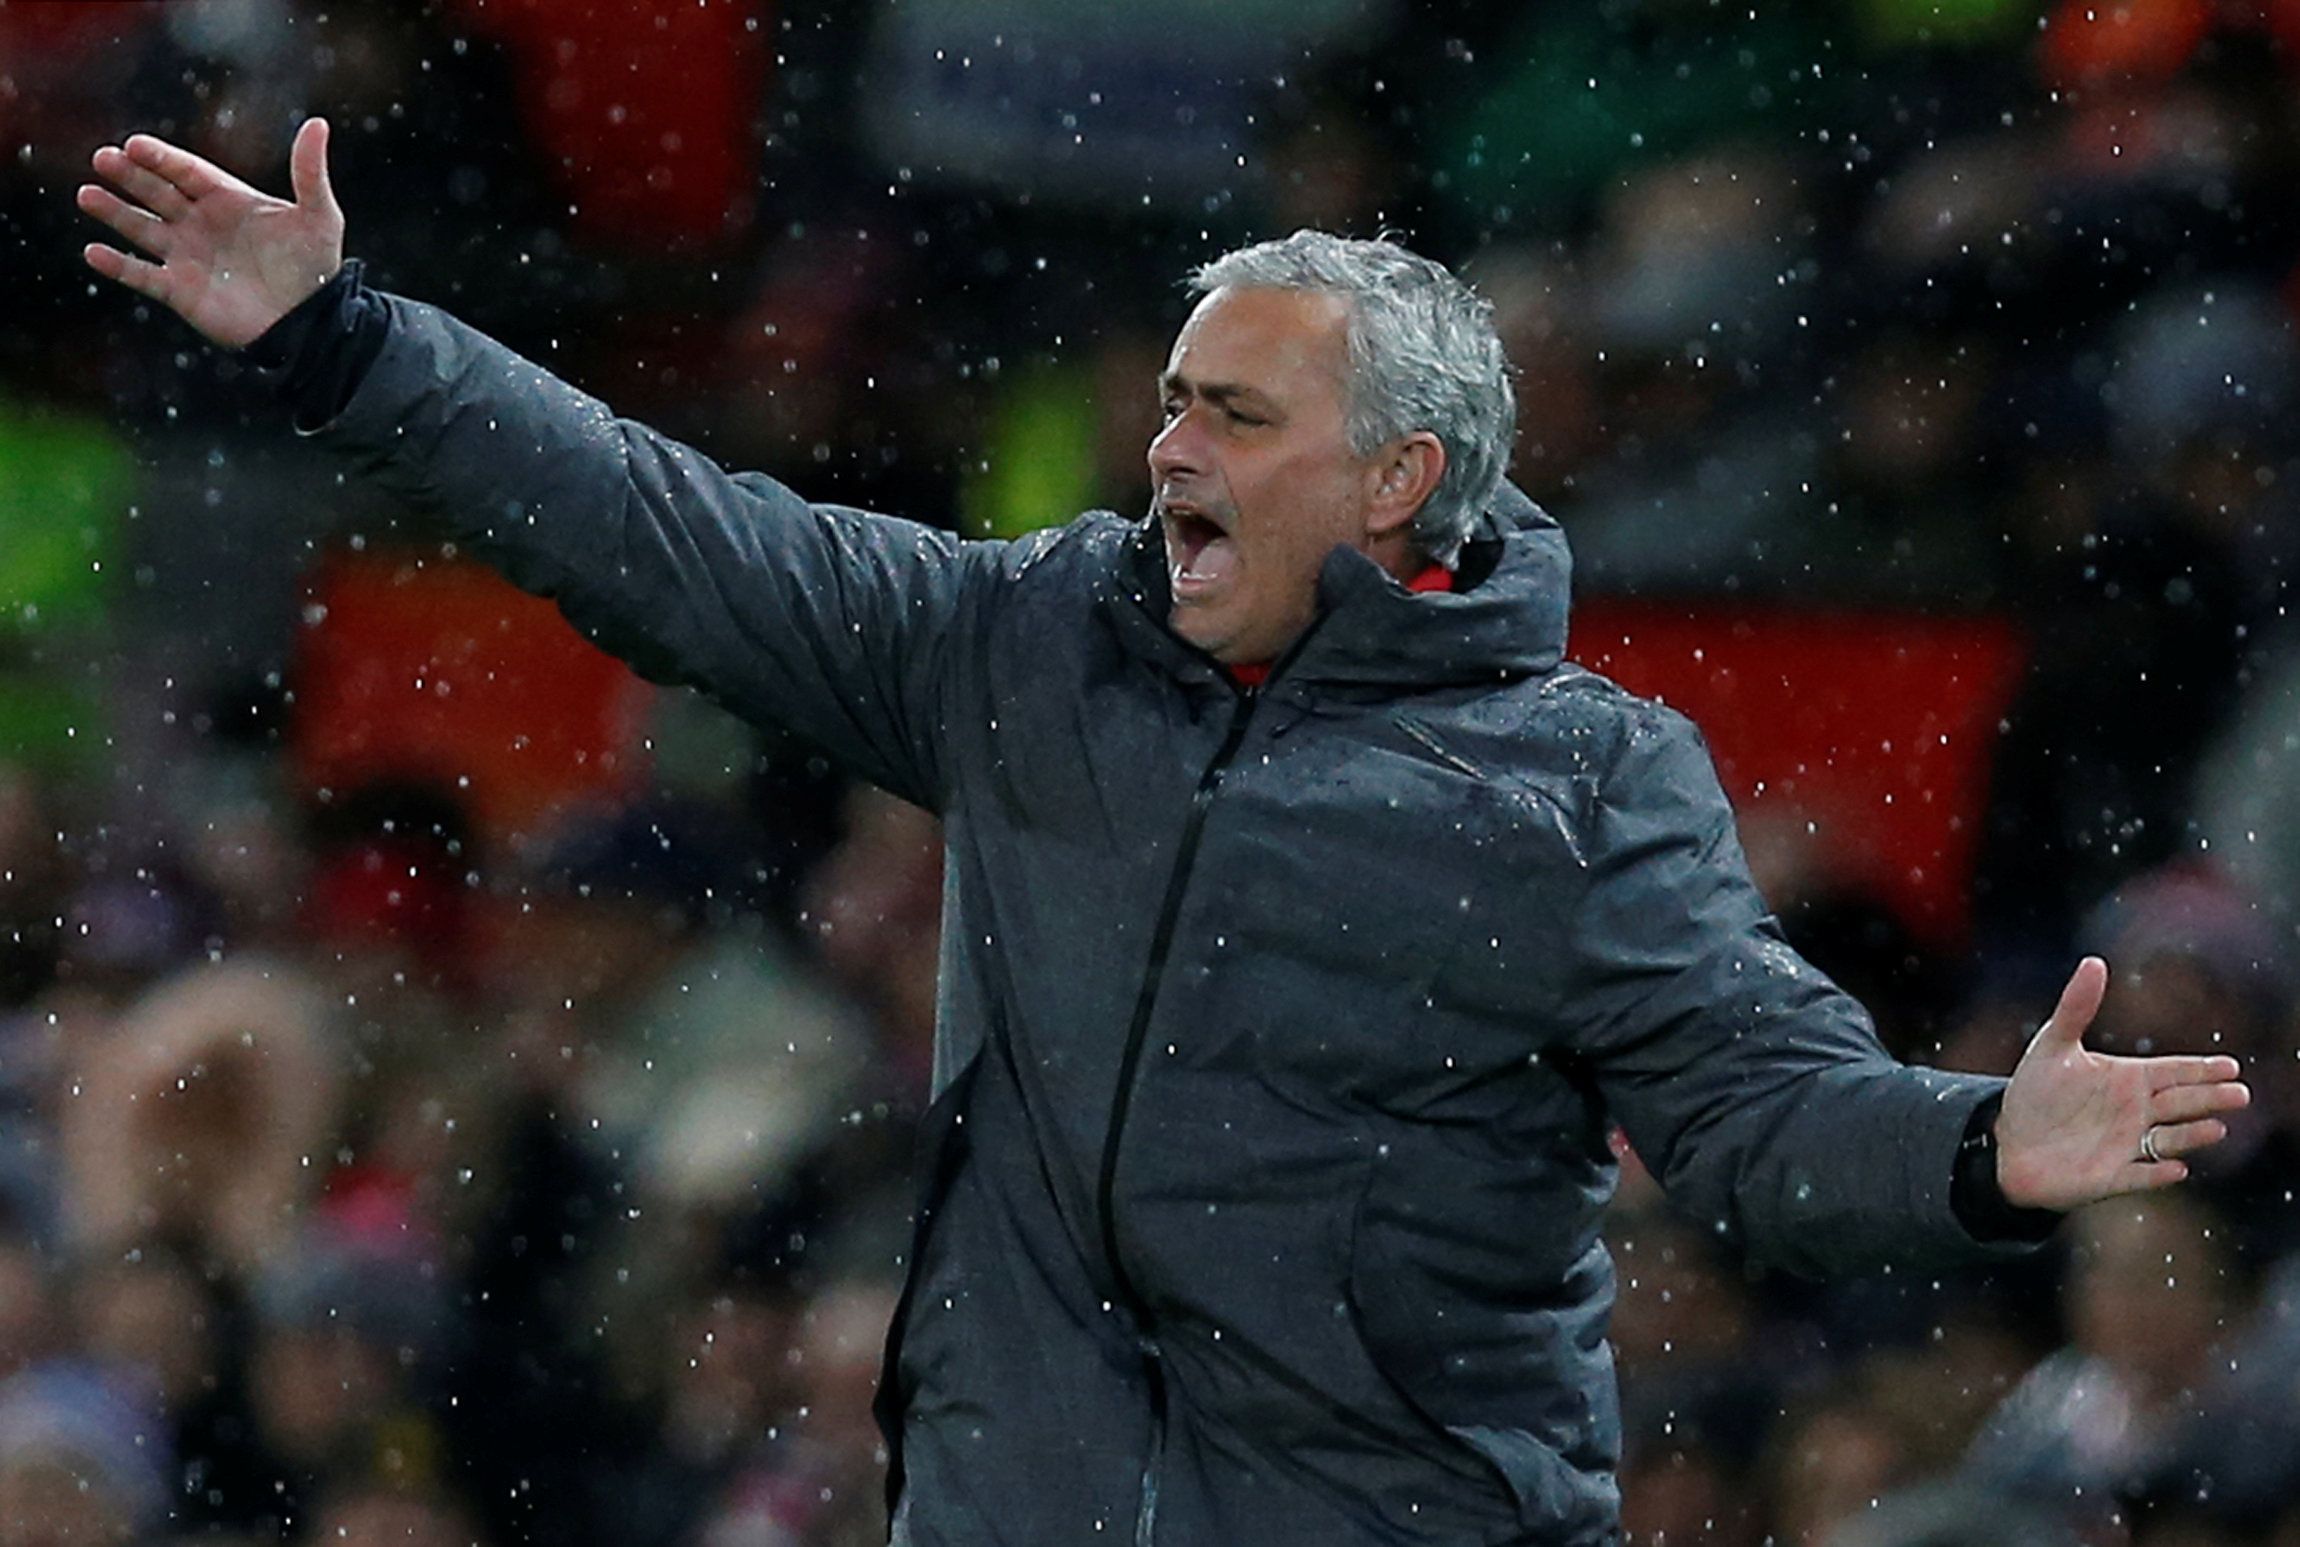 Soccer Football - Premier League - Manchester United vs Stoke City - Old Trafford, Manchester, Britain - January 15, 2018   Manchester United manager Jose Mourinho reacts   REUTERS/Andrew Yates    EDITORIAL USE ONLY. No use with unauthorized audio, video, data, fixture lists, club/league logos or 